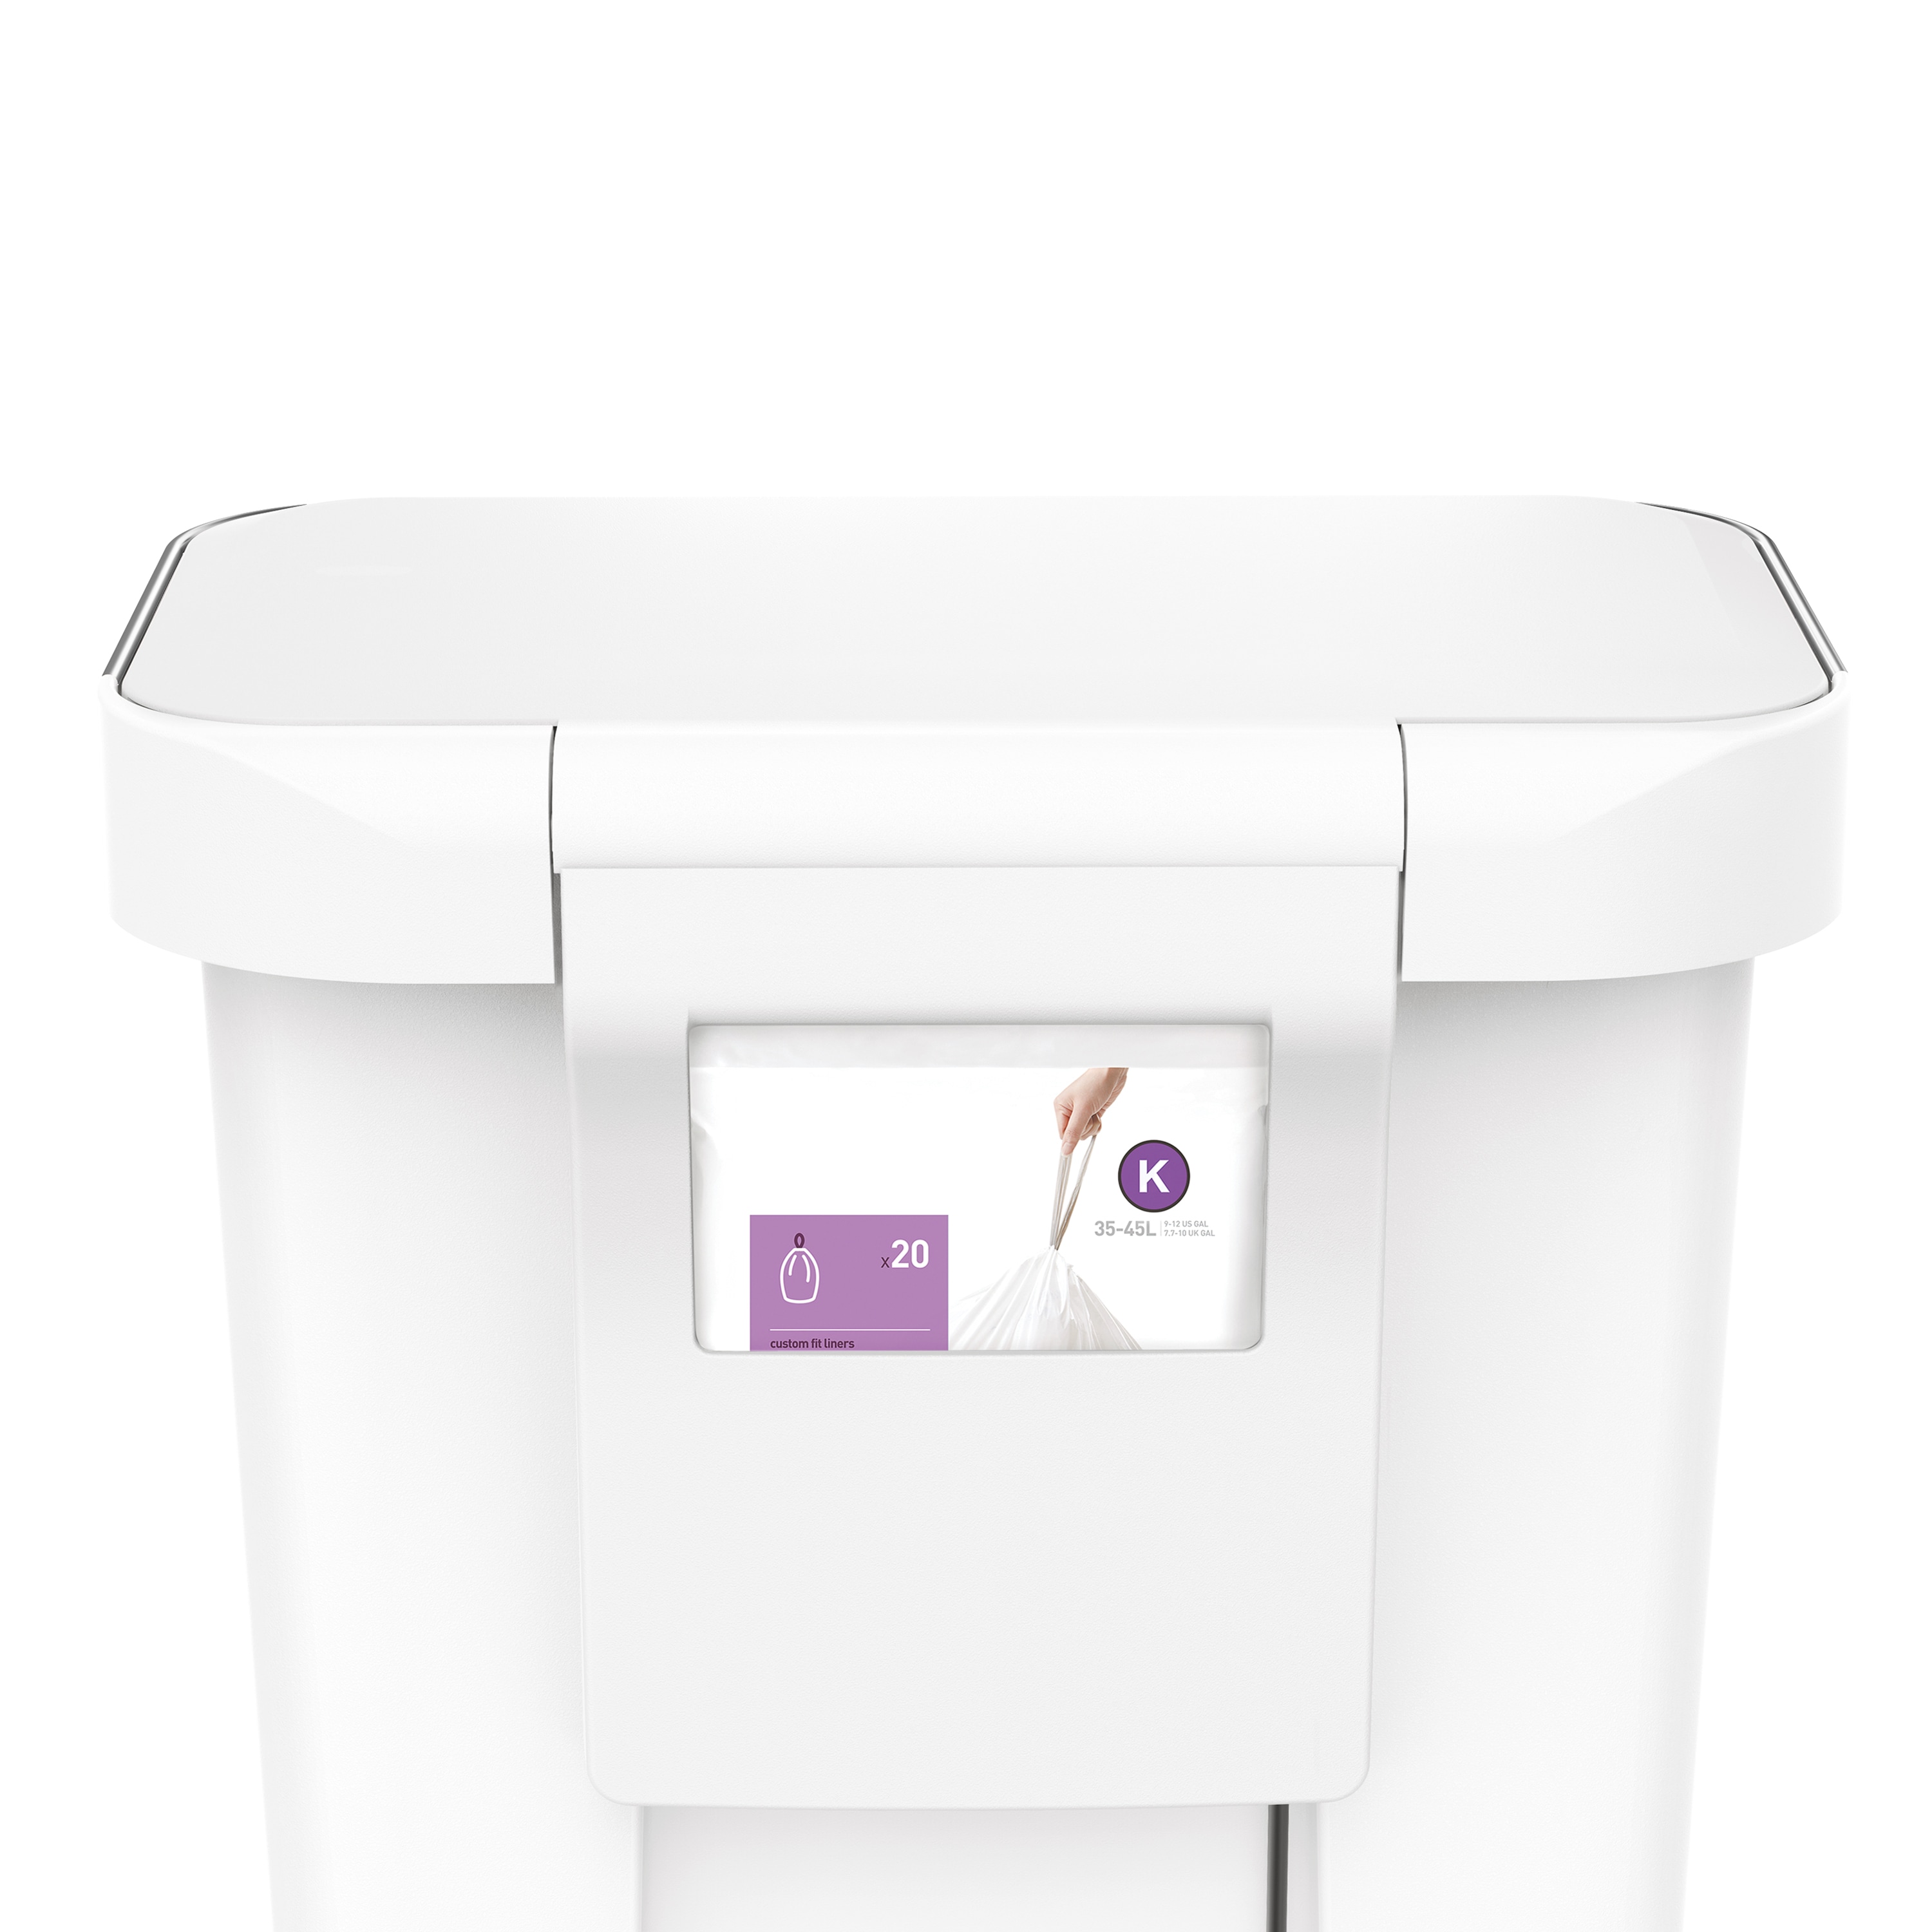 Simplehuman K Liners 38 Litre x 20 - Home Recycling